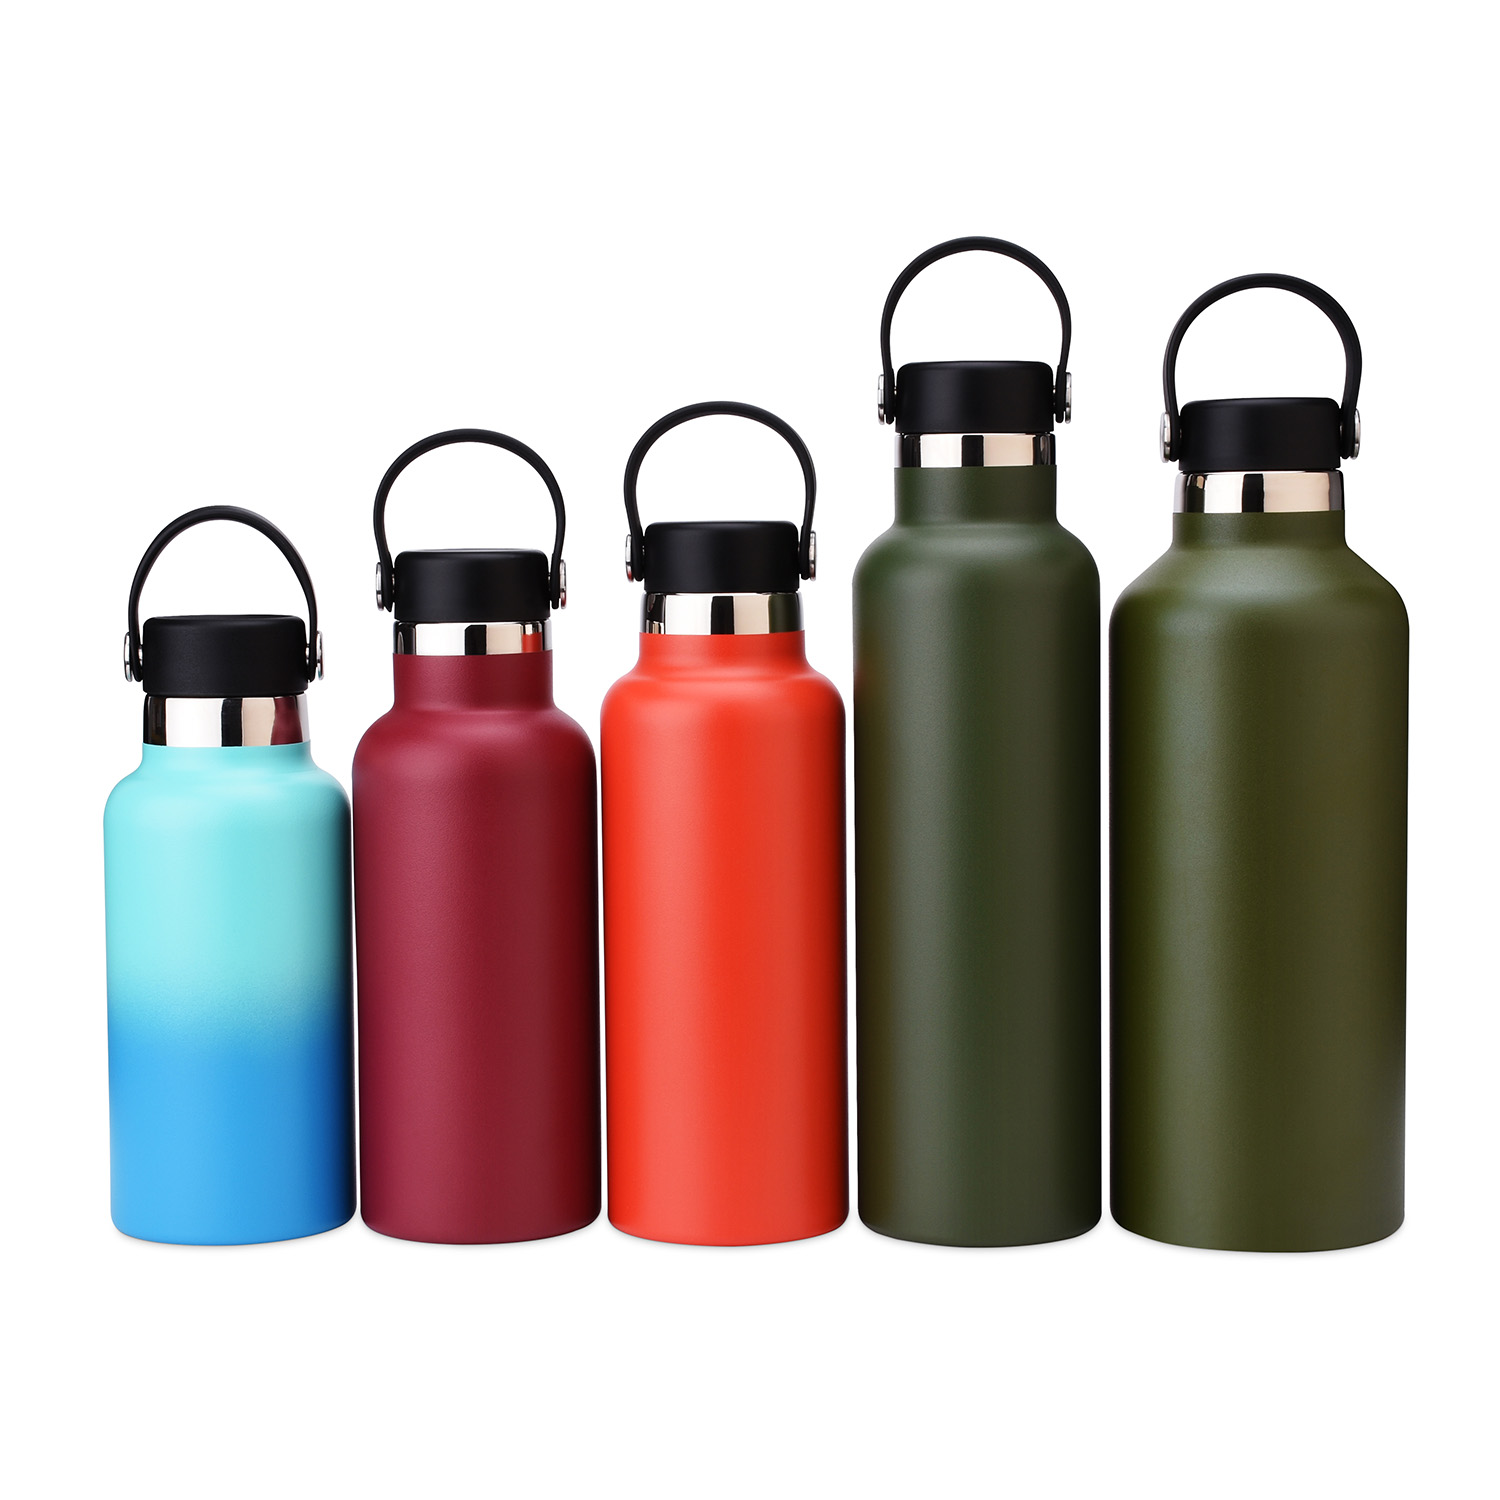  Hydro Flask 18 oz. Water Bottle - Stainless Steel, Reusable,  Vacuum Insulated with Standard Mouth Flex Lid : Everything Else